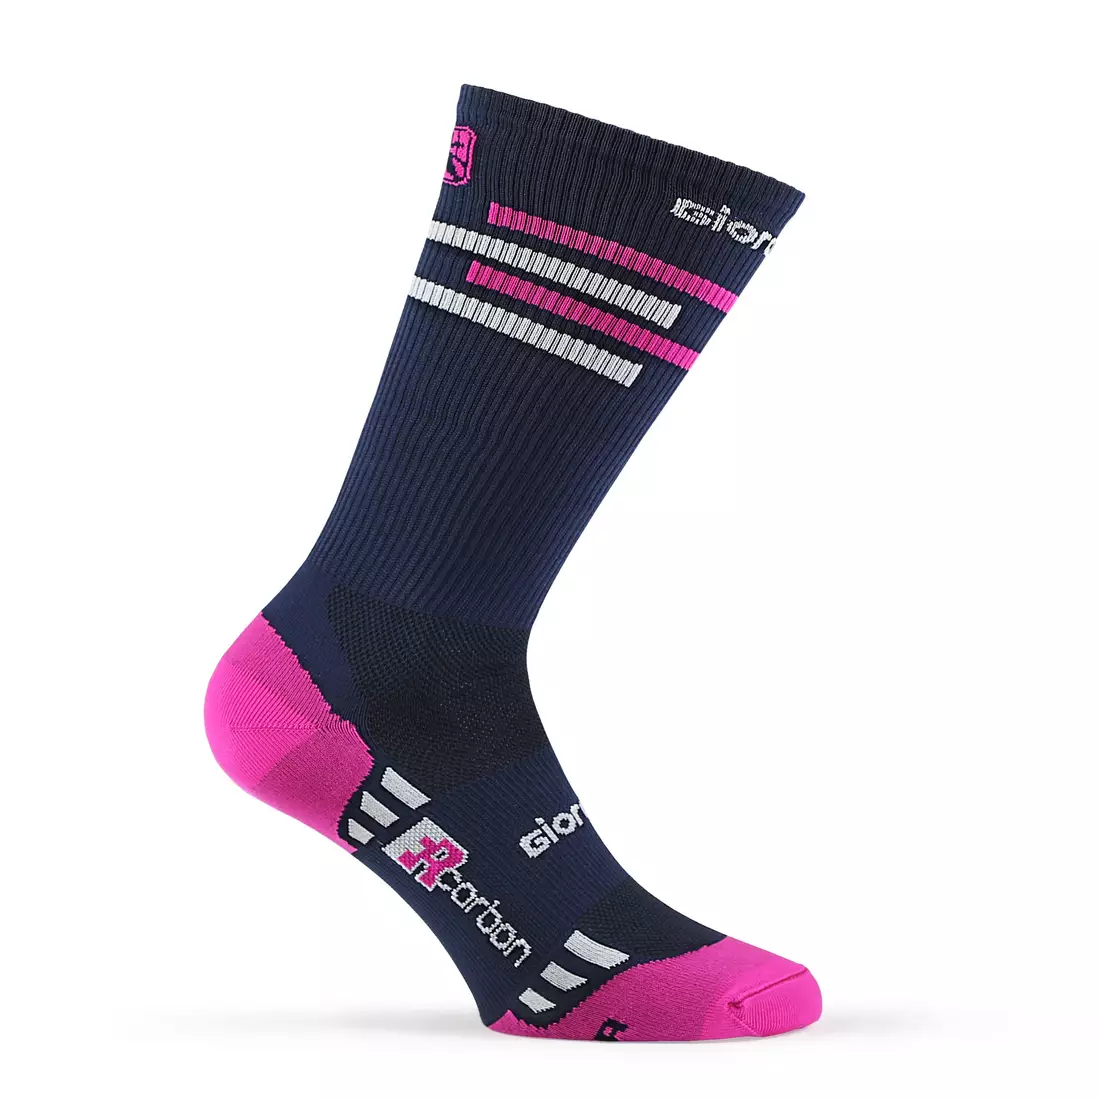 GIORDANA LINES blue and pink cycling socks